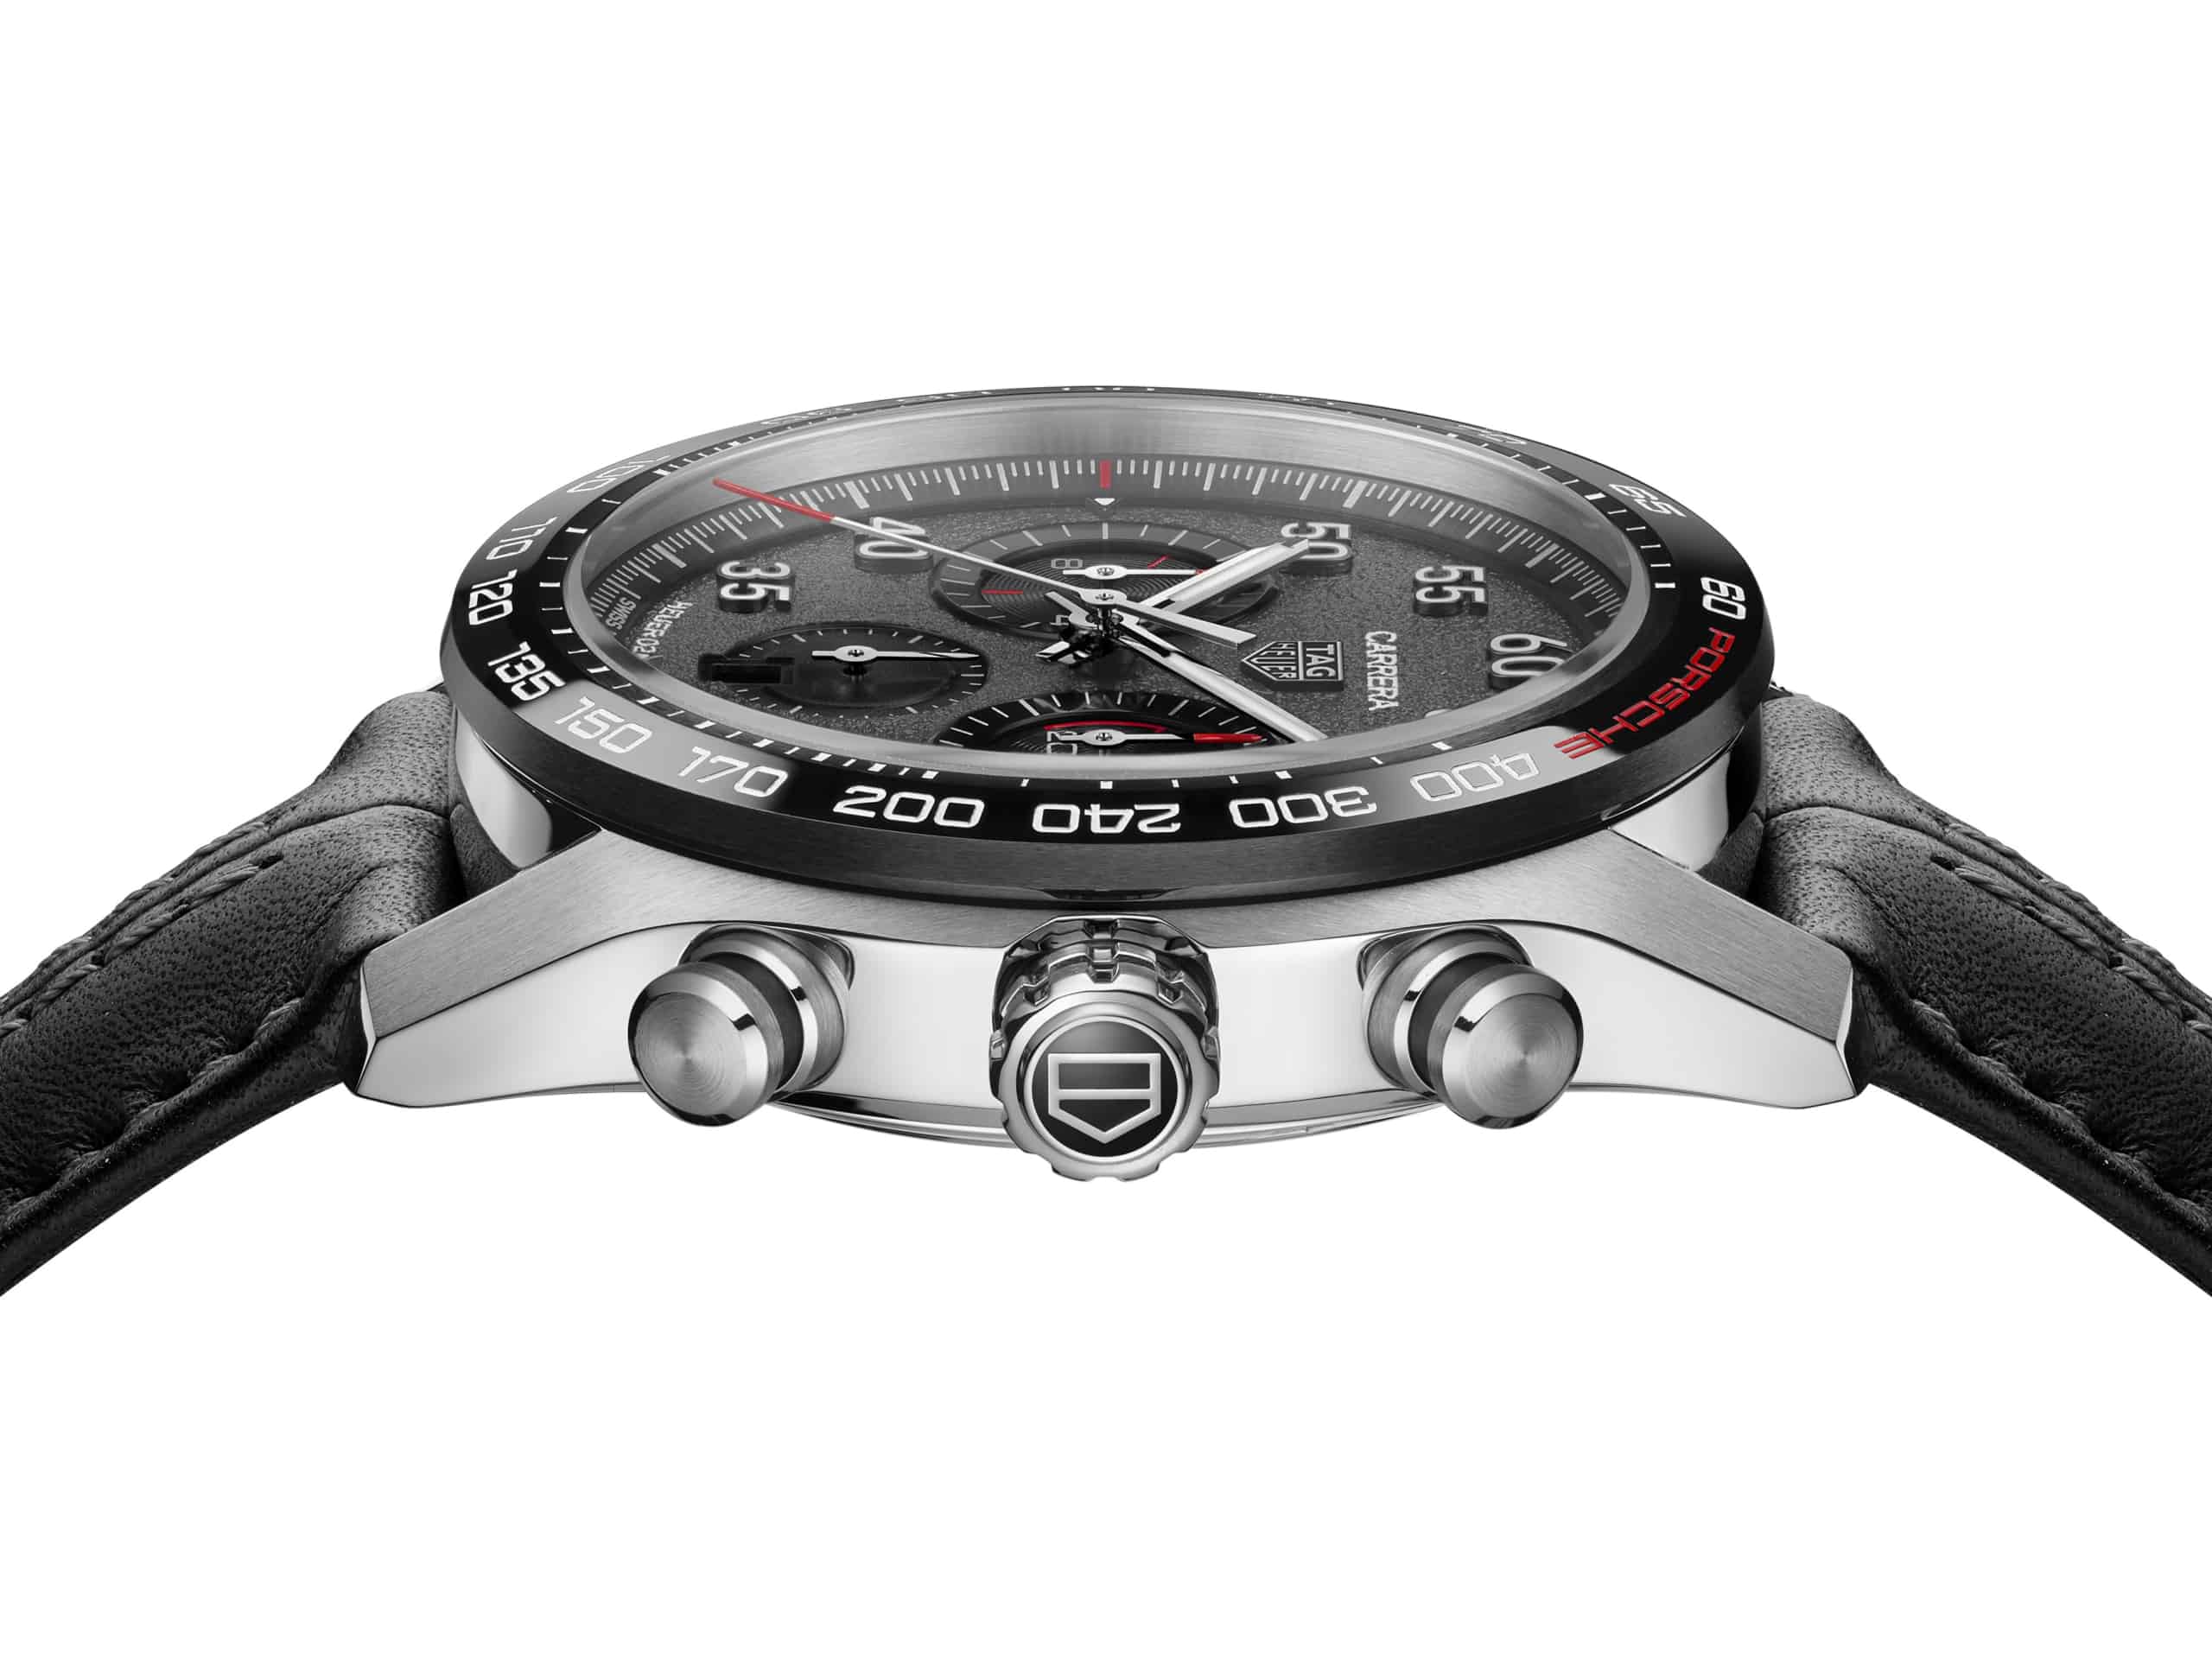 Introducing The TAG Heuer Carrera Porsche Chronograph Special Edition